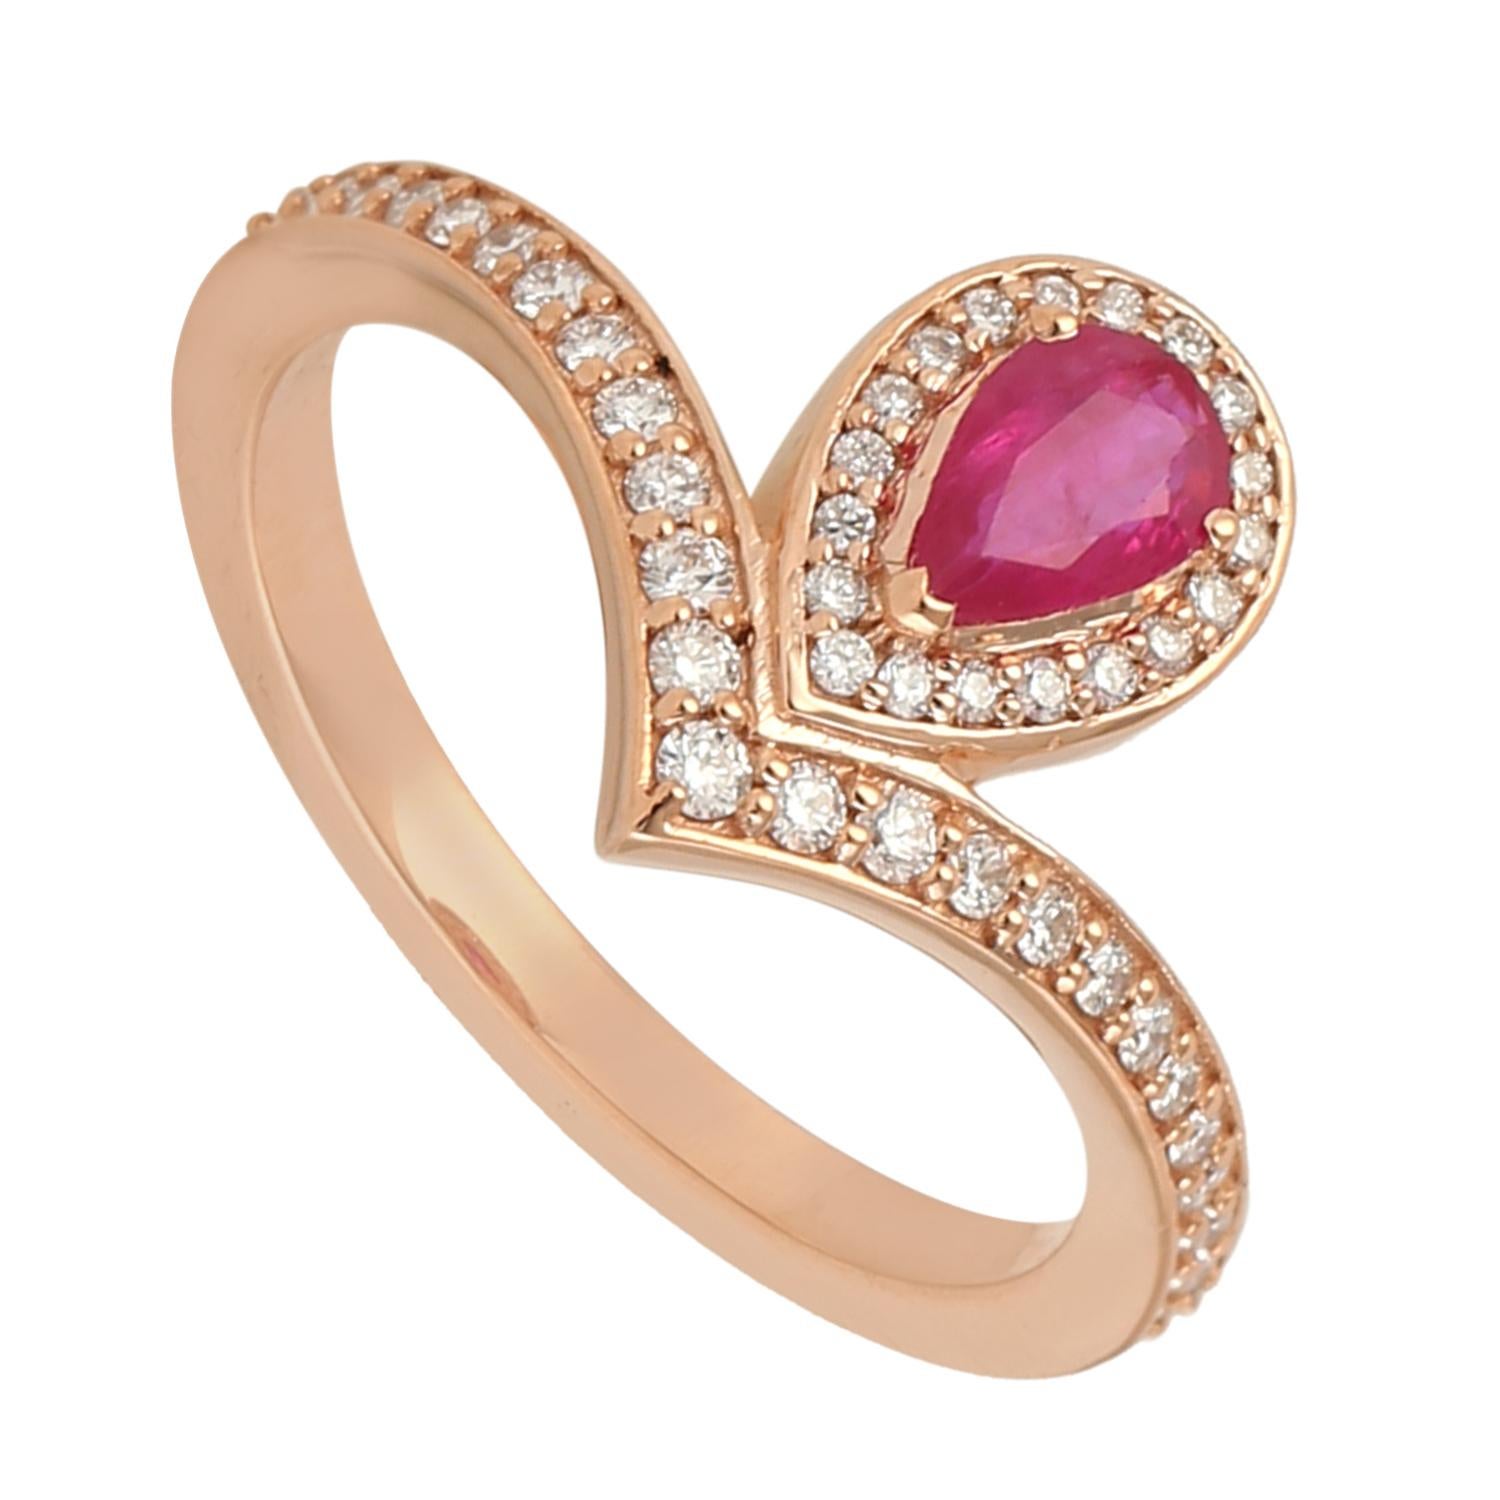 Mixed Cut Pear Shaped Ruby Ring Accented With Diamonds Made In 18k Rose Gold For Sale